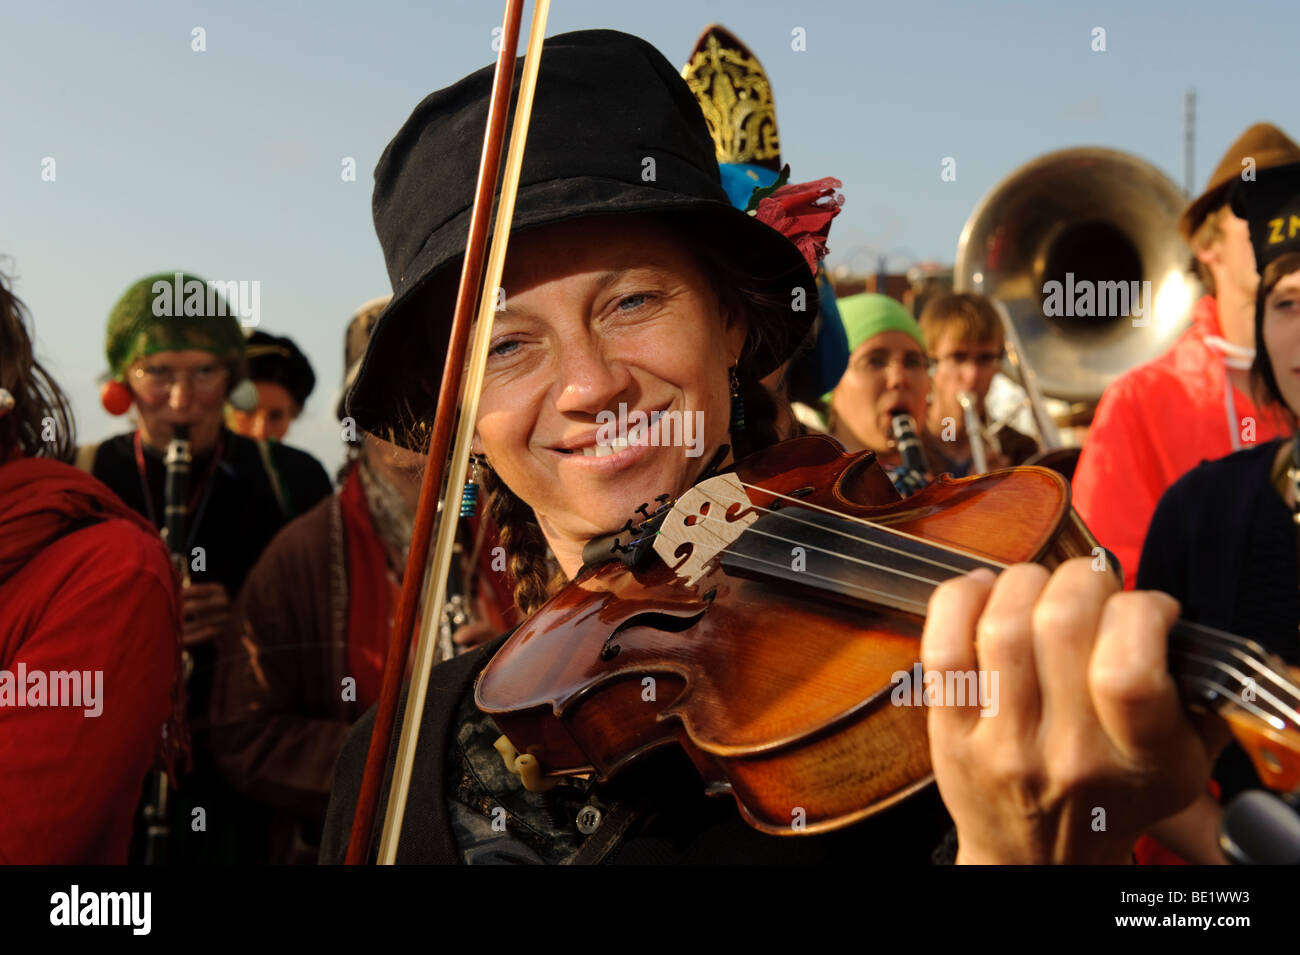 Musicians in the De Propere Fanfare belgian marching band performing on the  promenade, Aberystwyth Wales UK Stock Photo - Alamy